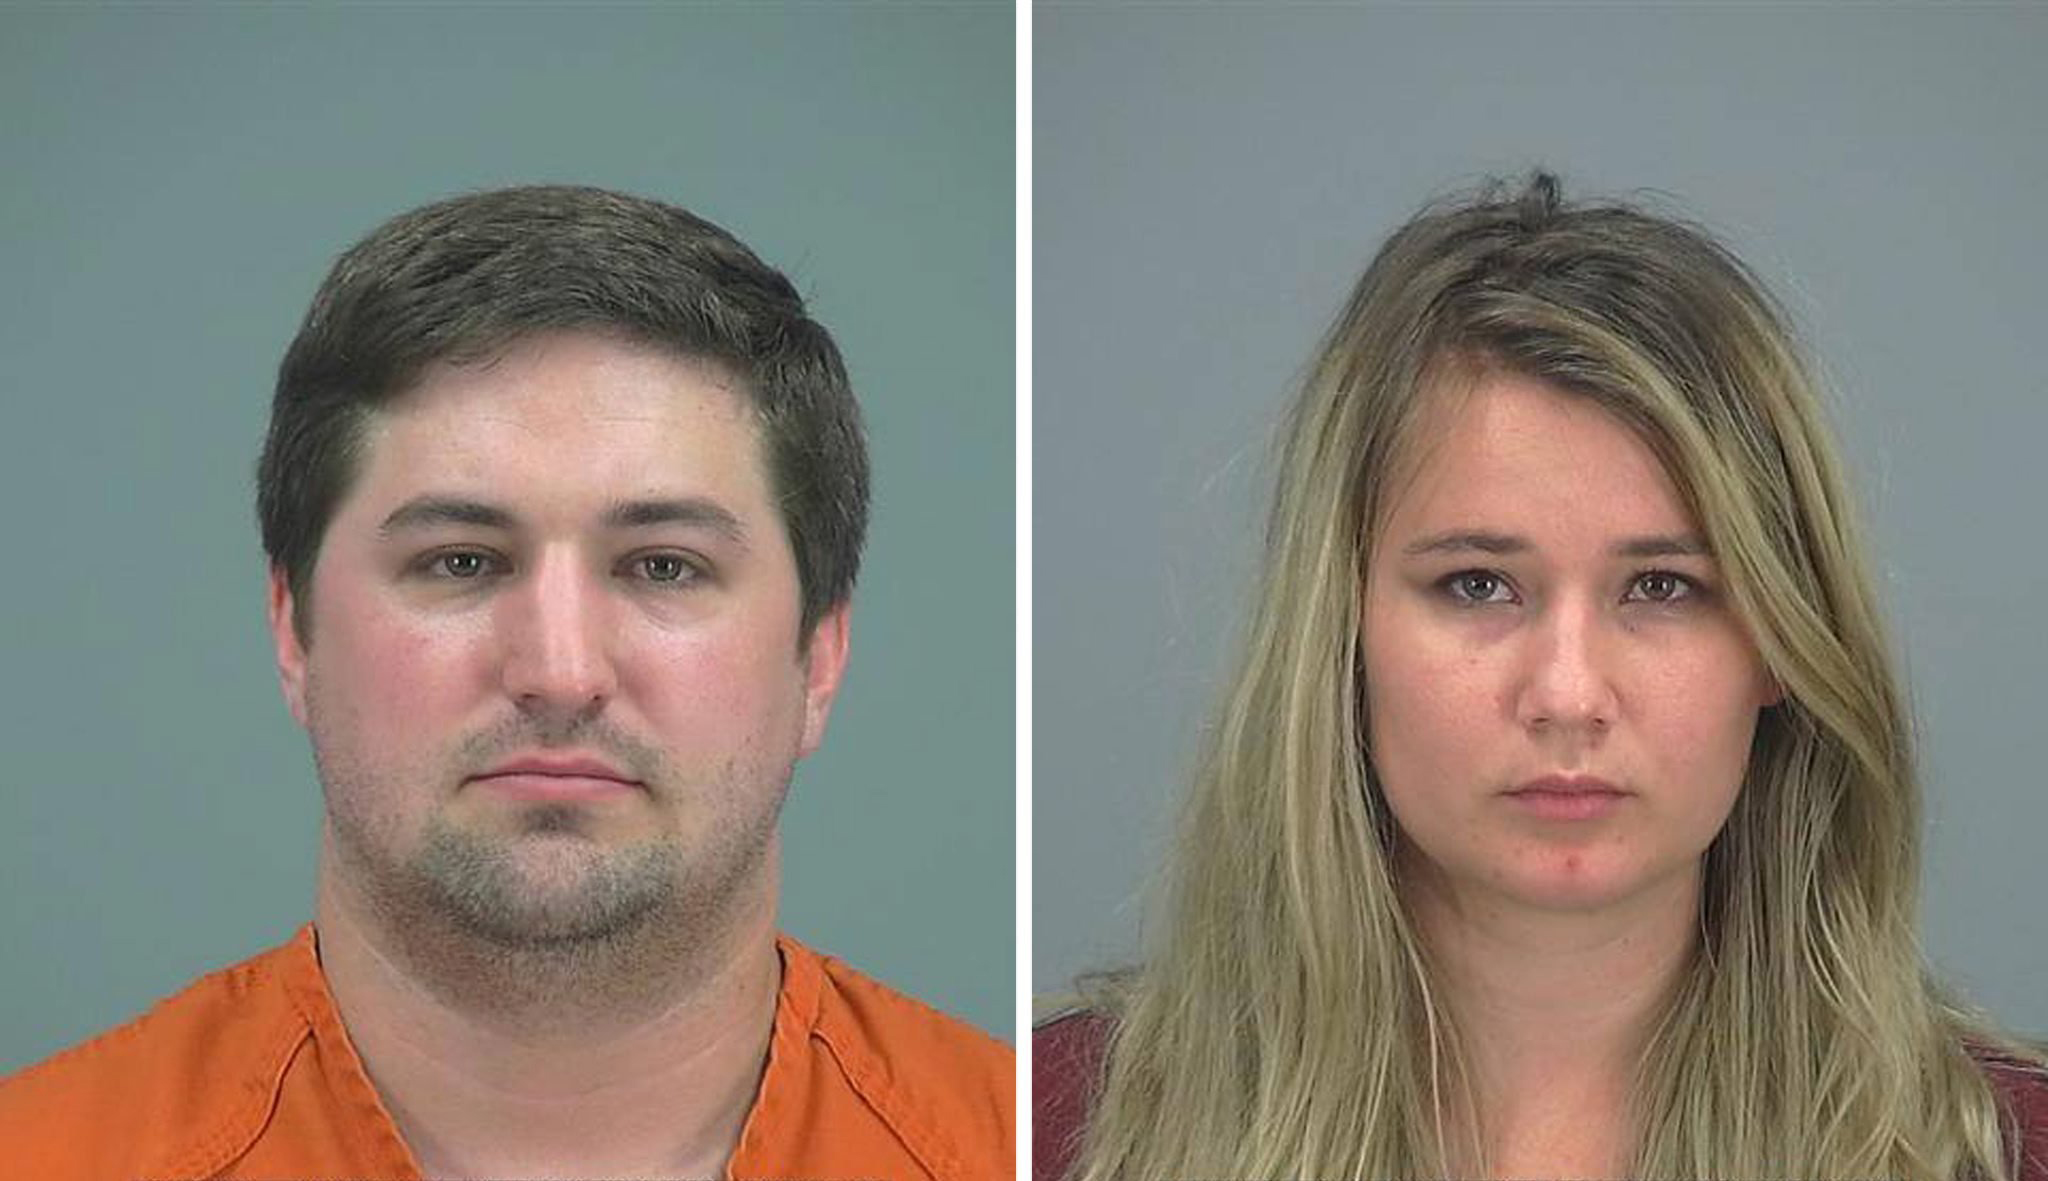 Brent Daley, 27, and Brianne Daley, 25, were arrested for child endangerment and neglect, in San Tan Valley, Arizona, Aug 2, 2016.